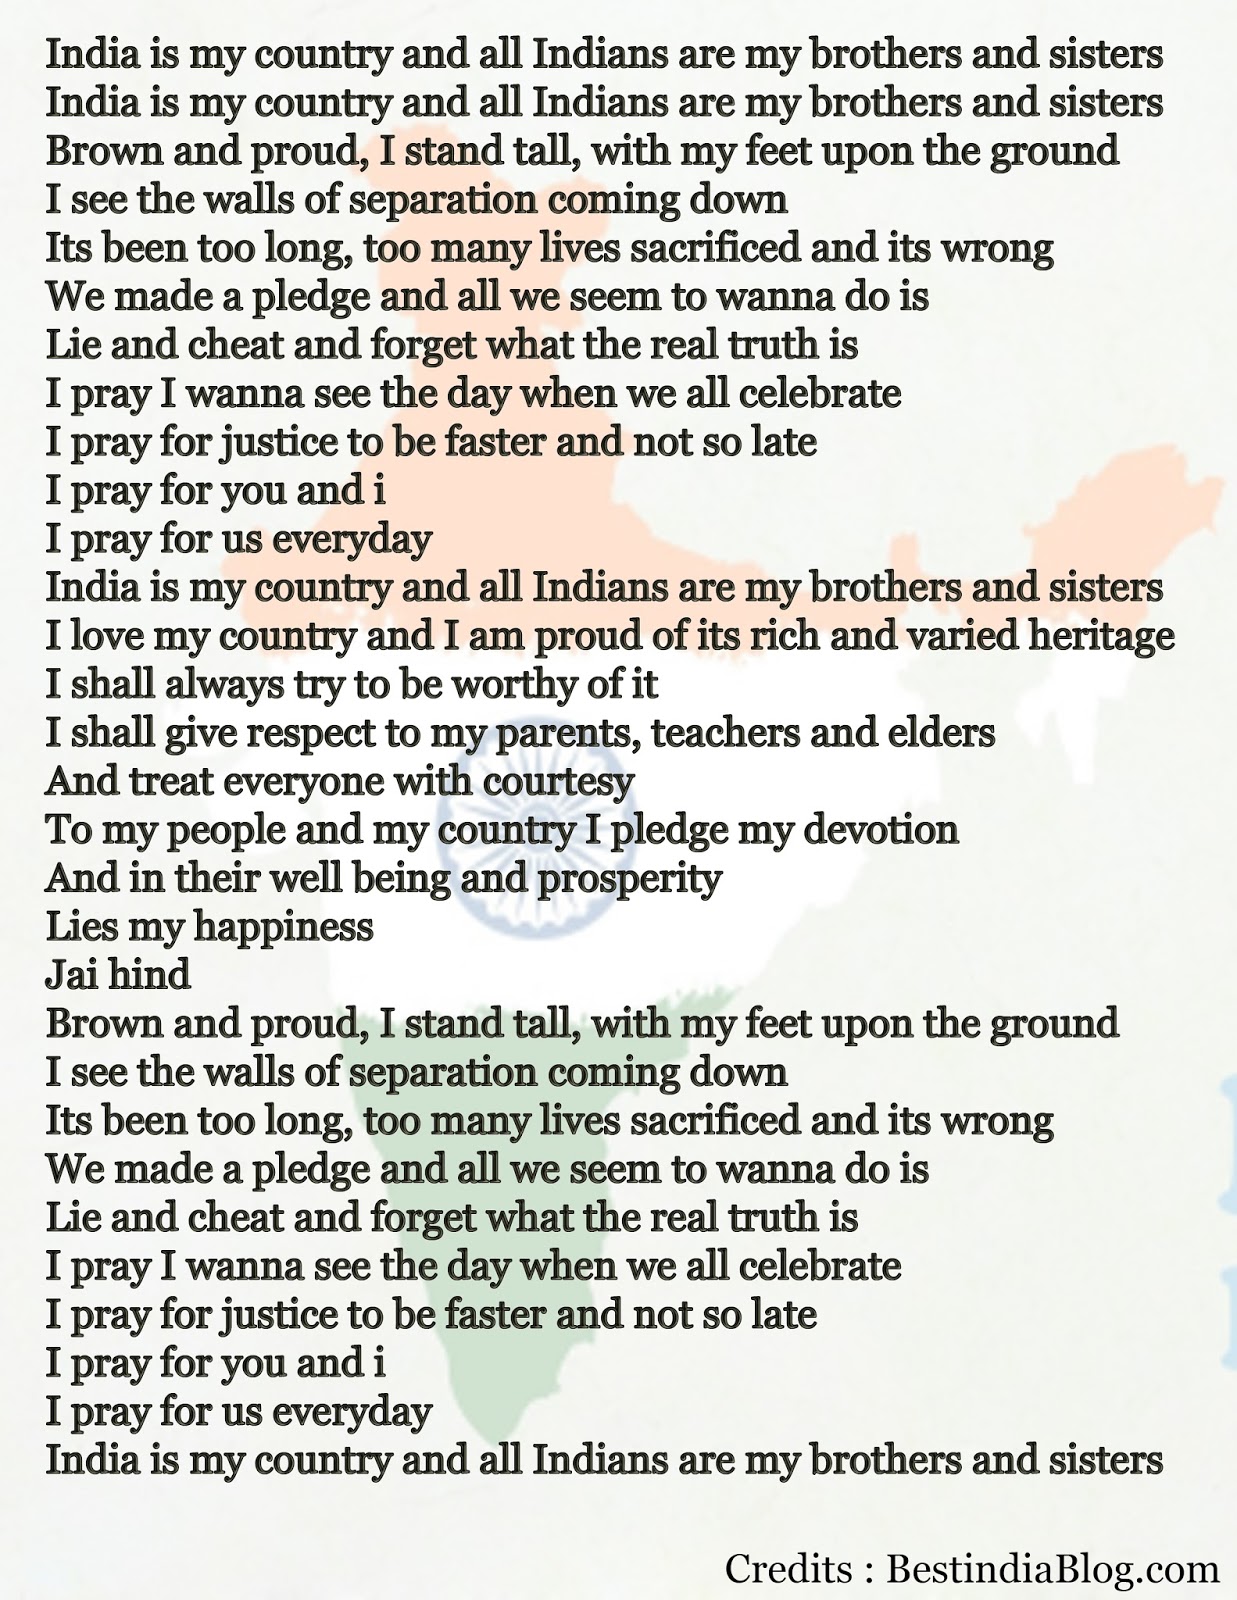 Essays on what the national anthem means to me